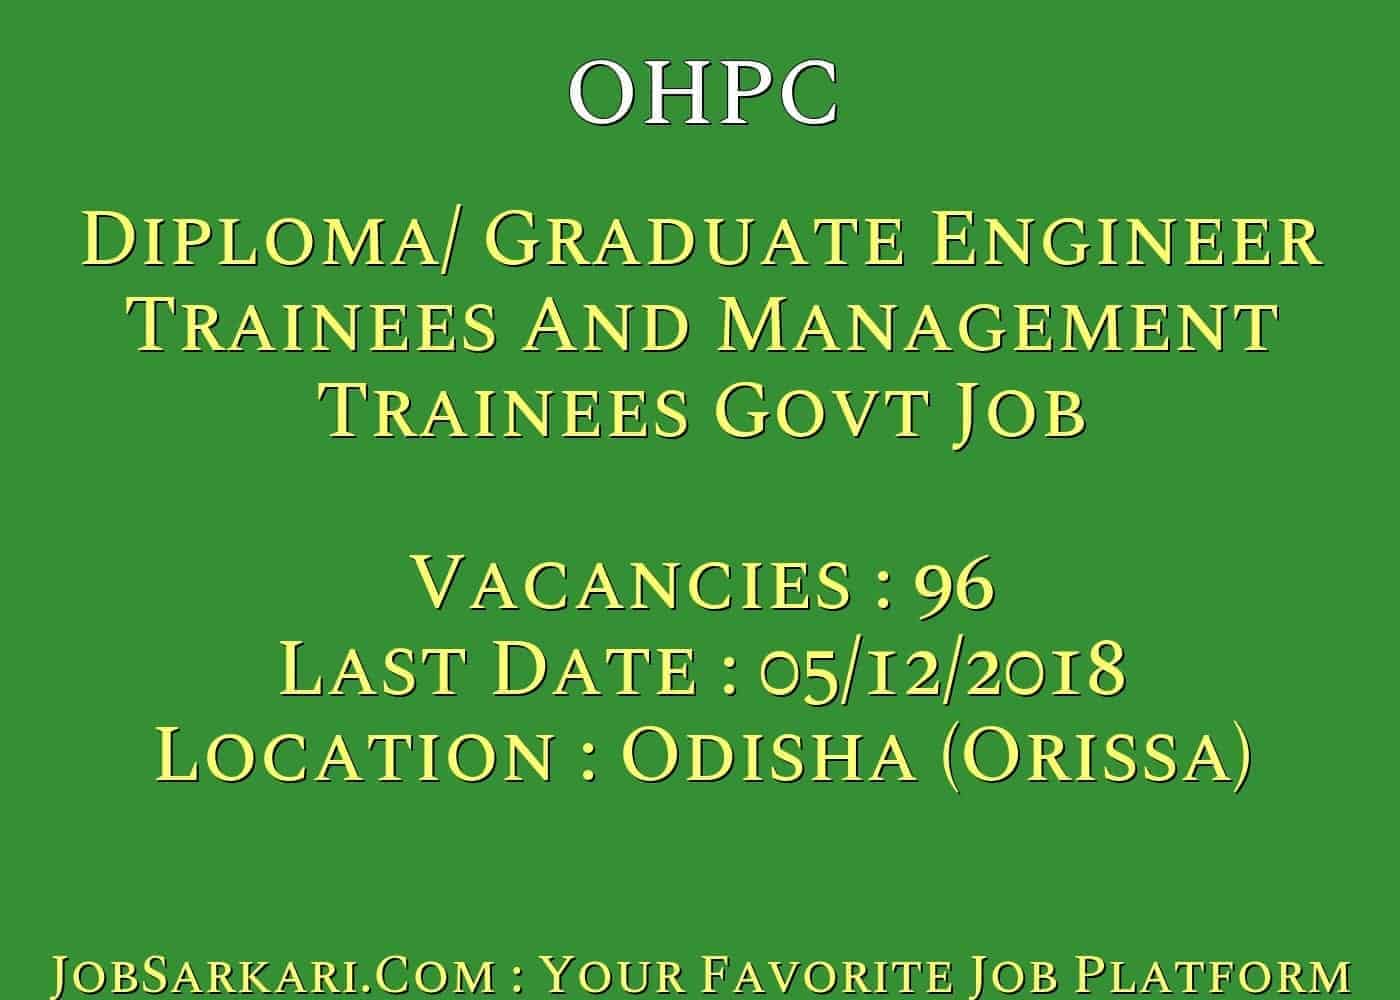 OHPC Recruitment 2018 For Diploma/ Graduate Engineer Trainees And Management Trainees Govt Job